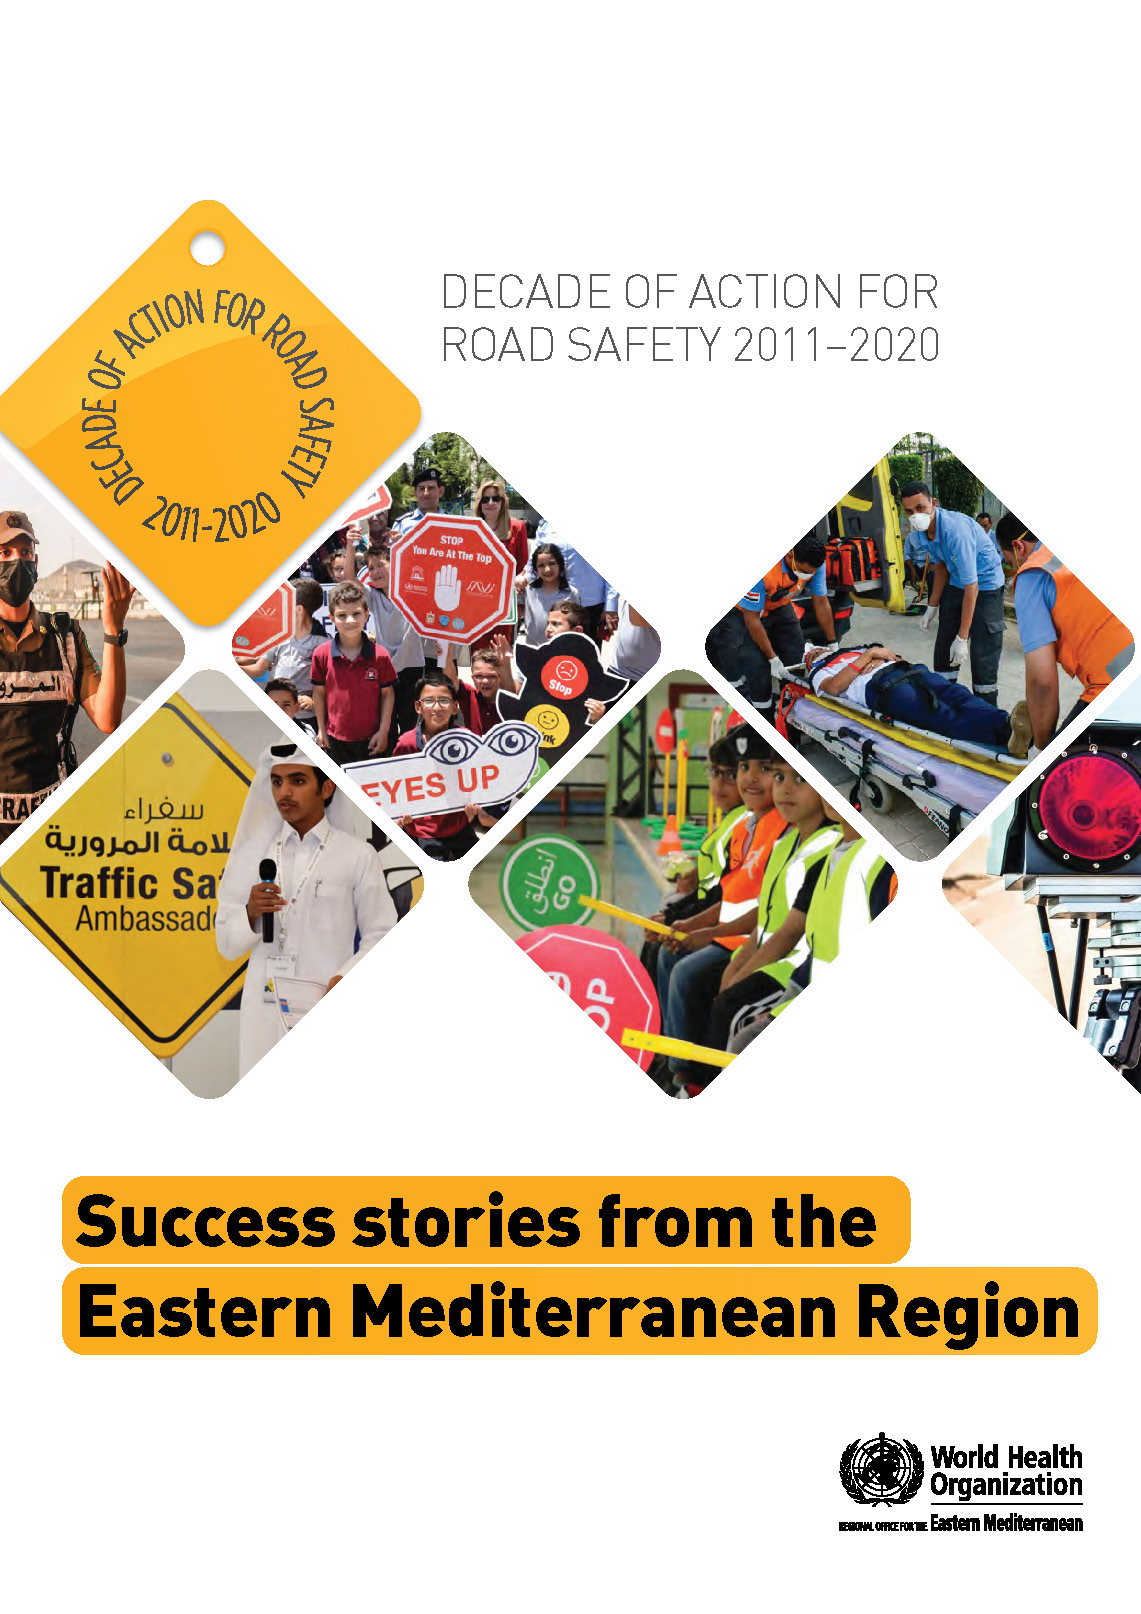 Decade of action for road safety 2011-2020: success stories from the Eastern Mediterranean Region